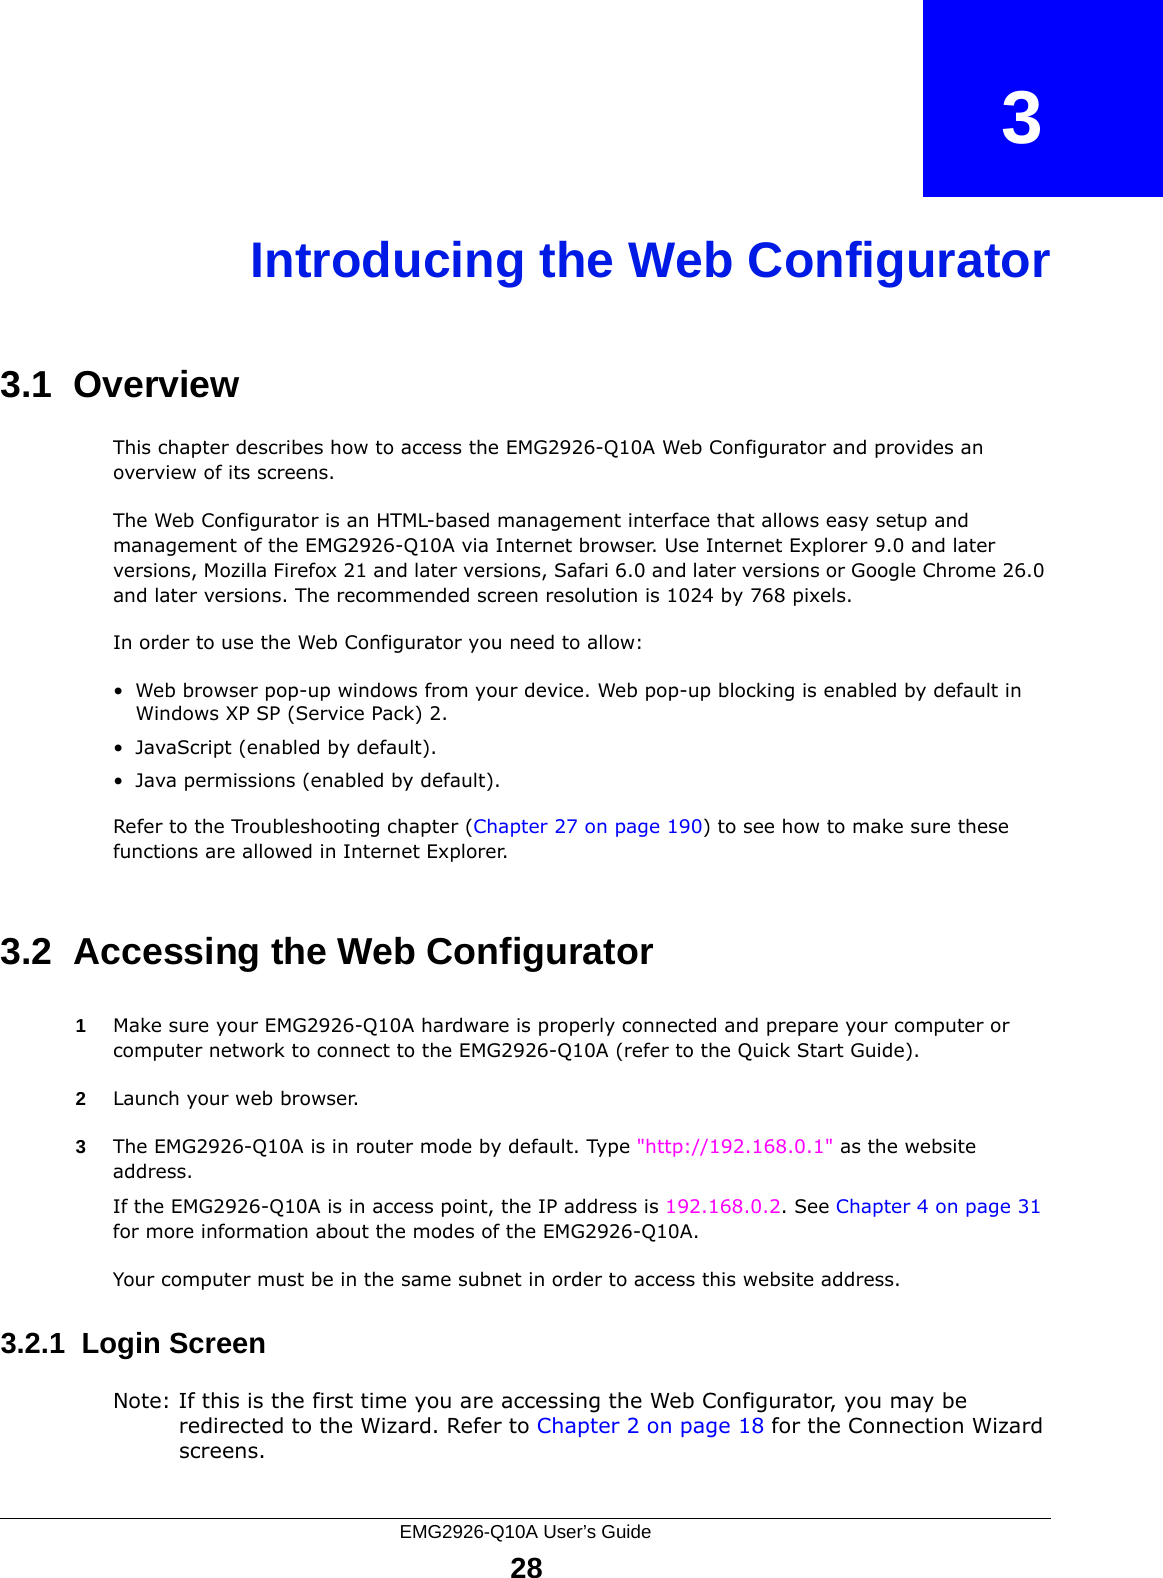 EMG2926-Q10A User’s Guide28CHAPTER   3Introducing the Web Configurator3.1  OverviewThis chapter describes how to access the EMG2926-Q10A Web Configurator and provides an overview of its screens.The Web Configurator is an HTML-based management interface that allows easy setup and management of the EMG2926-Q10A via Internet browser. Use Internet Explorer 9.0 and later versions, Mozilla Firefox 21 and later versions, Safari 6.0 and later versions or Google Chrome 26.0 and later versions. The recommended screen resolution is 1024 by 768 pixels.In order to use the Web Configurator you need to allow:• Web browser pop-up windows from your device. Web pop-up blocking is enabled by default in Windows XP SP (Service Pack) 2.• JavaScript (enabled by default).• Java permissions (enabled by default).Refer to the Troubleshooting chapter (Chapter 27 on page 190) to see how to make sure these functions are allowed in Internet Explorer.3.2  Accessing the Web Configurator1Make sure your EMG2926-Q10A hardware is properly connected and prepare your computer or computer network to connect to the EMG2926-Q10A (refer to the Quick Start Guide).2Launch your web browser.3The EMG2926-Q10A is in router mode by default. Type &quot;http://192.168.0.1&quot; as the website address.If the EMG2926-Q10A is in access point, the IP address is 192.168.0.2. See Chapter 4 on page 31 for more information about the modes of the EMG2926-Q10A.Your computer must be in the same subnet in order to access this website address.3.2.1  Login ScreenNote: If this is the first time you are accessing the Web Configurator, you may be redirected to the Wizard. Refer to Chapter 2 on page 18 for the Connection Wizard screens. 